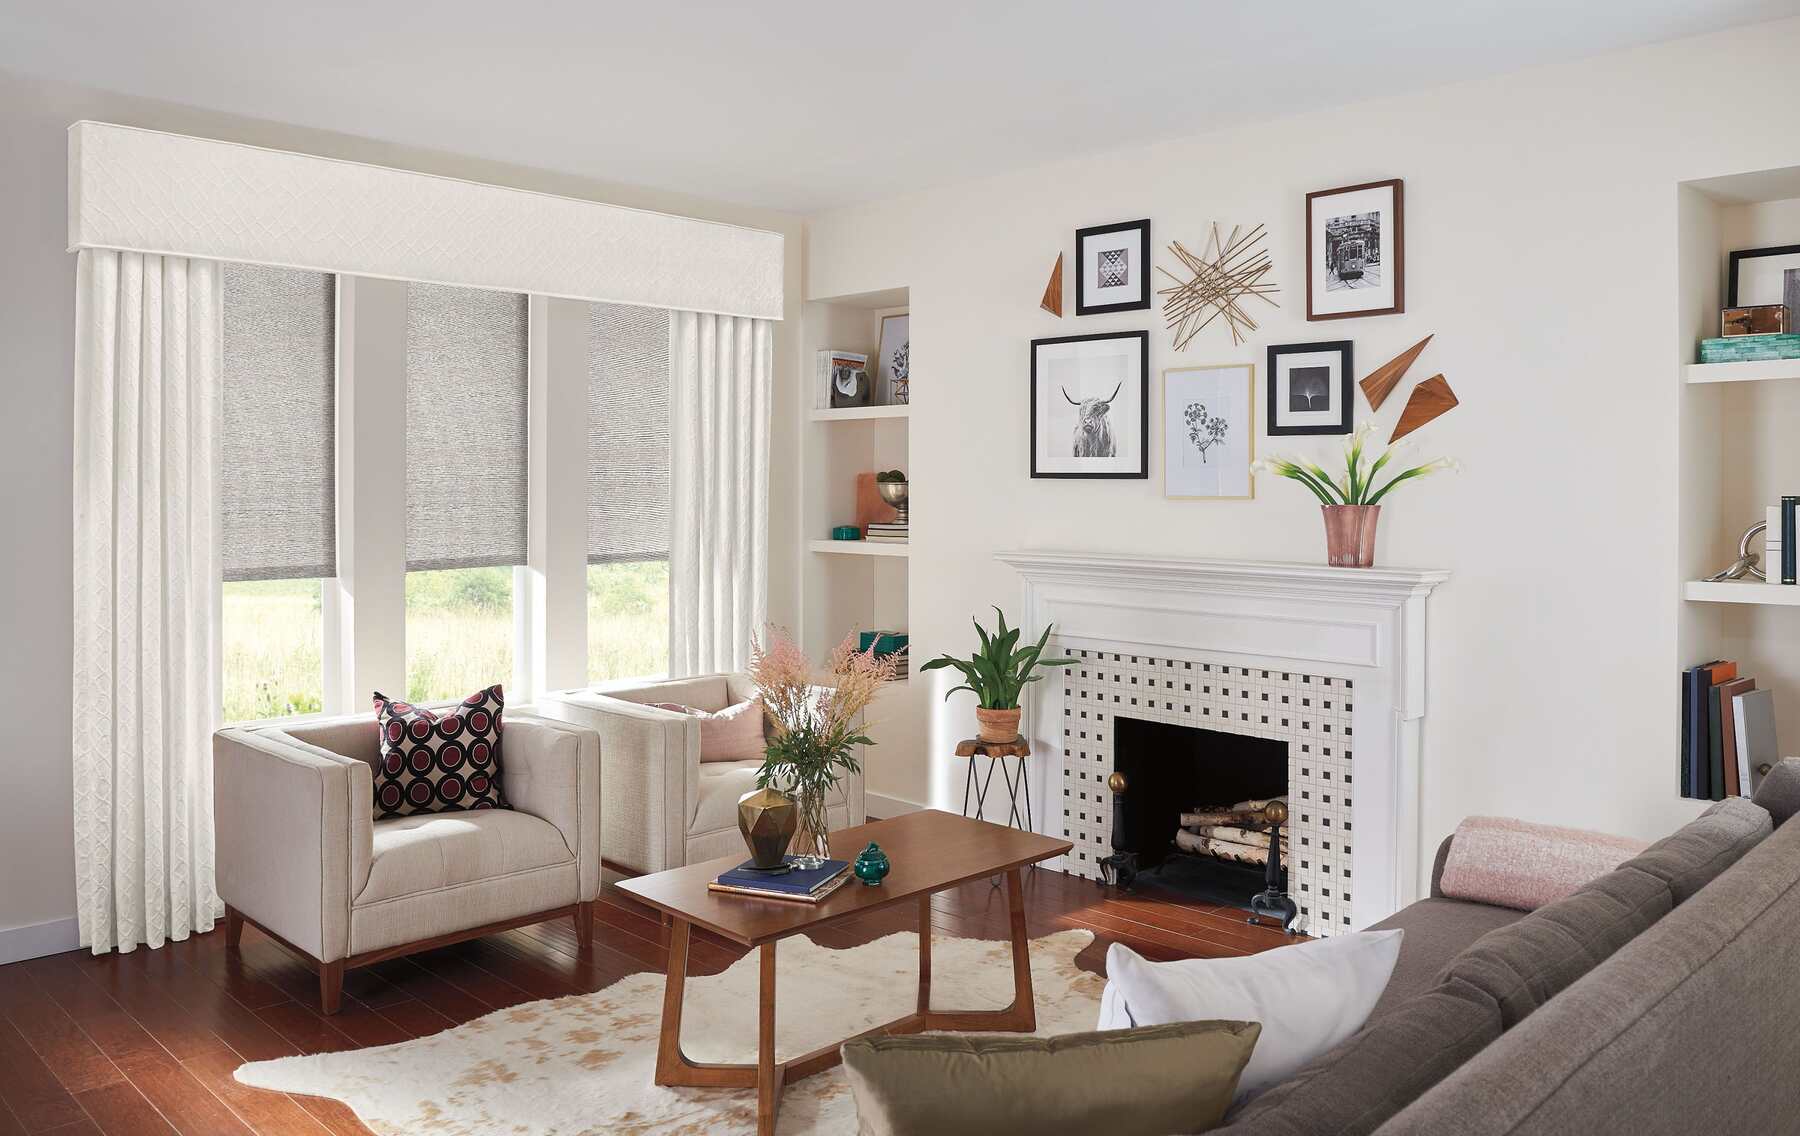 Living room with gray and white chairs and white long curtains